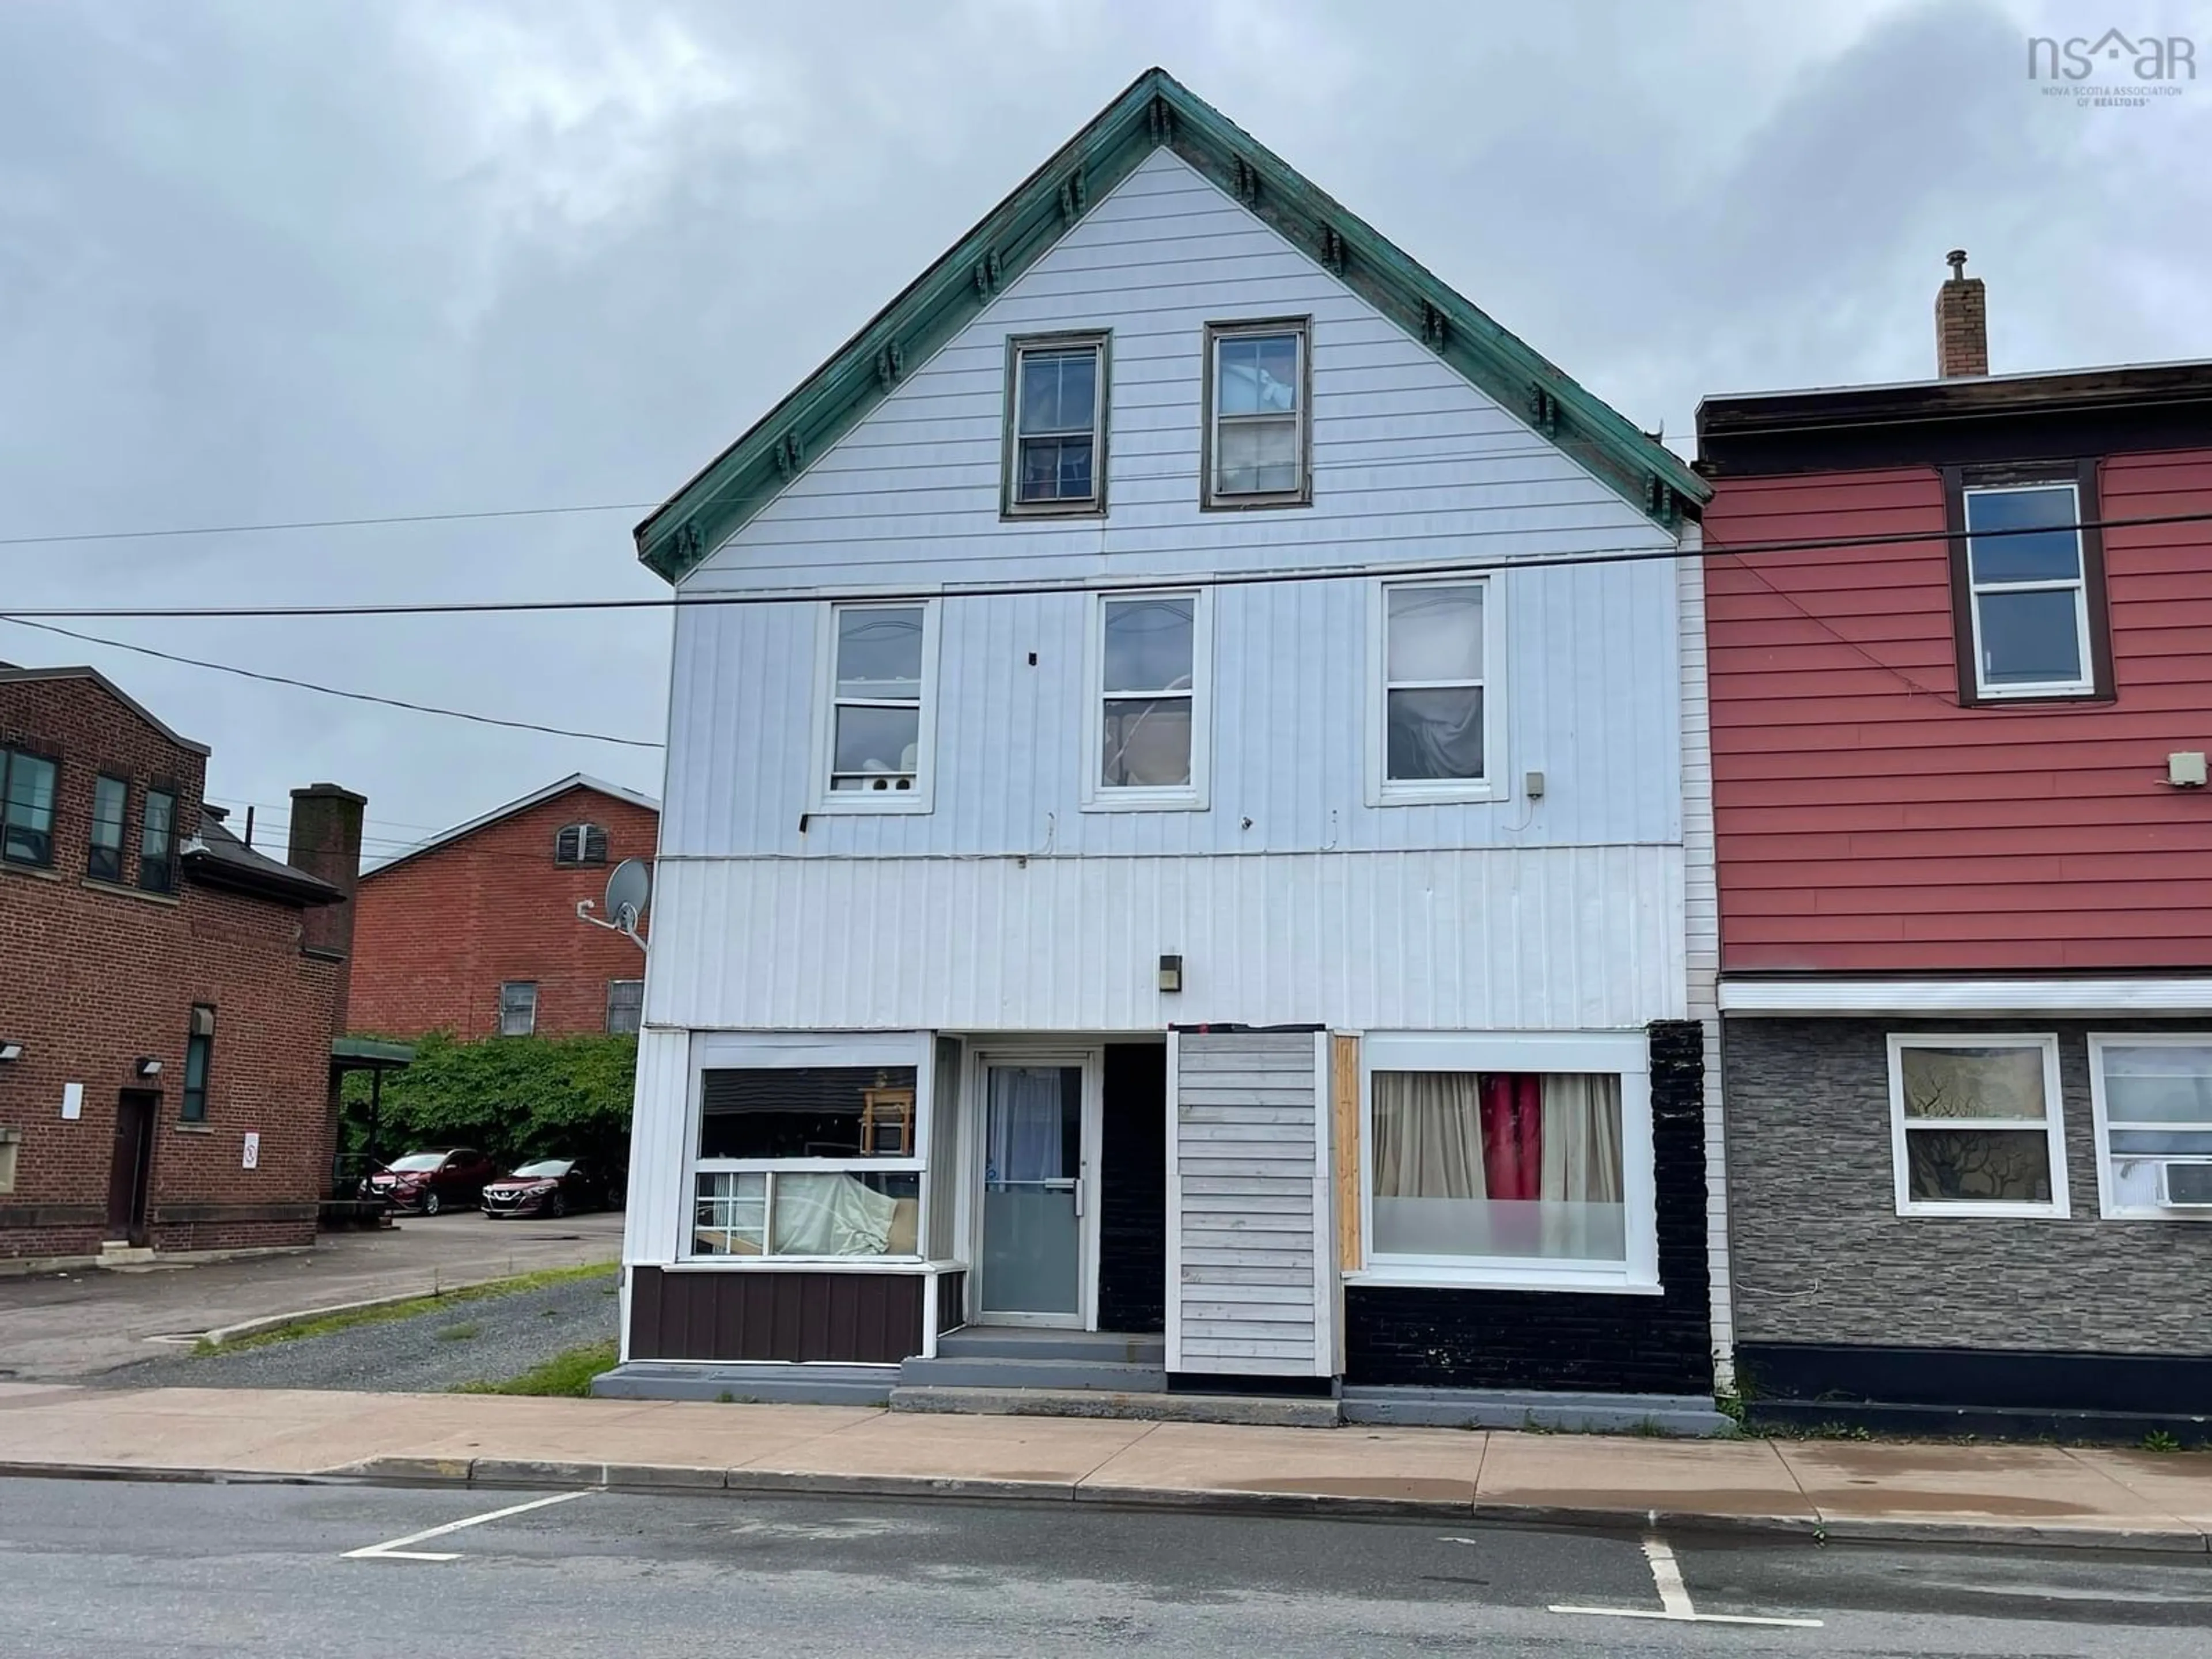 Home with unknown exterior material for 260-262 Foord St, Stellarton Nova Scotia B0K 1S0